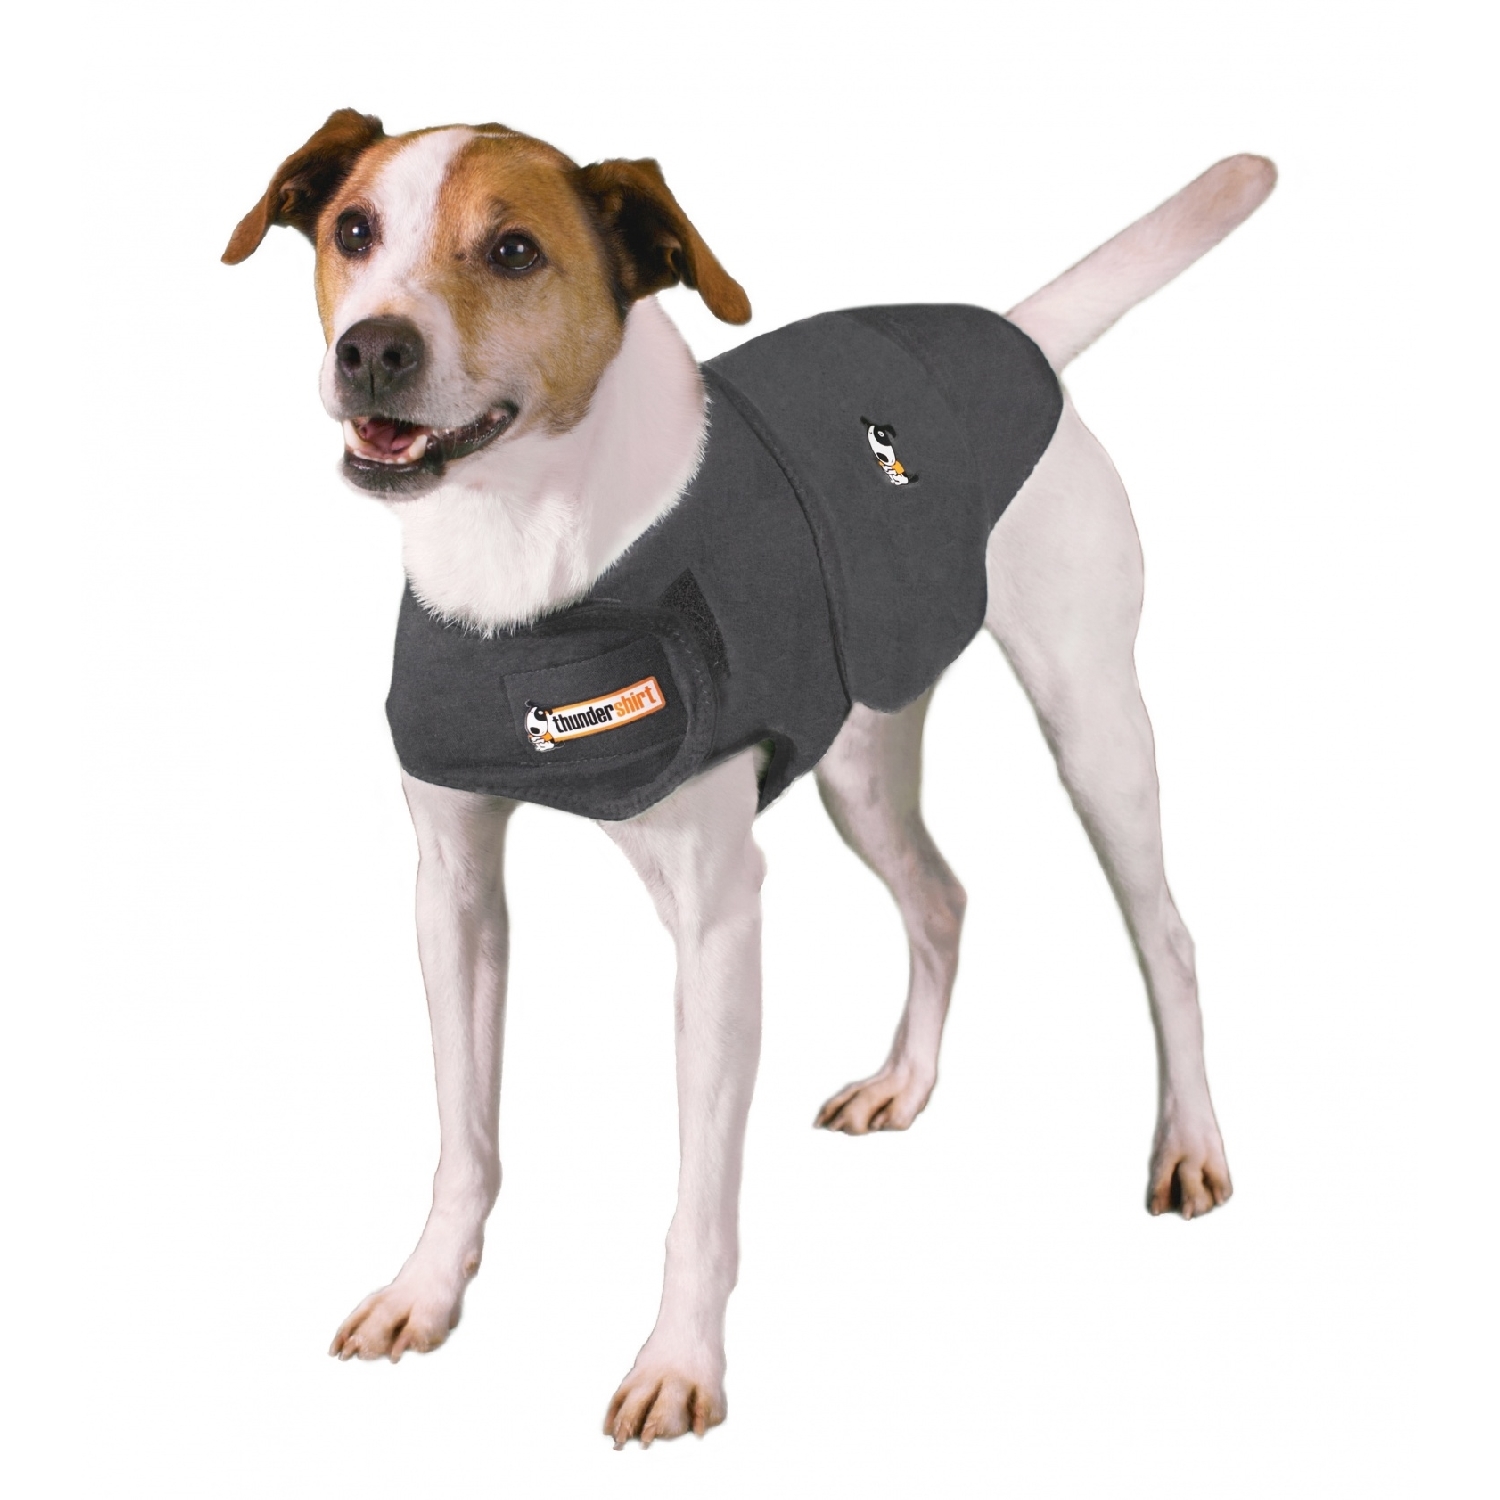 Thundershirt - Anti-Anxiety Calming Vest for Dogs XS-XXL image 3